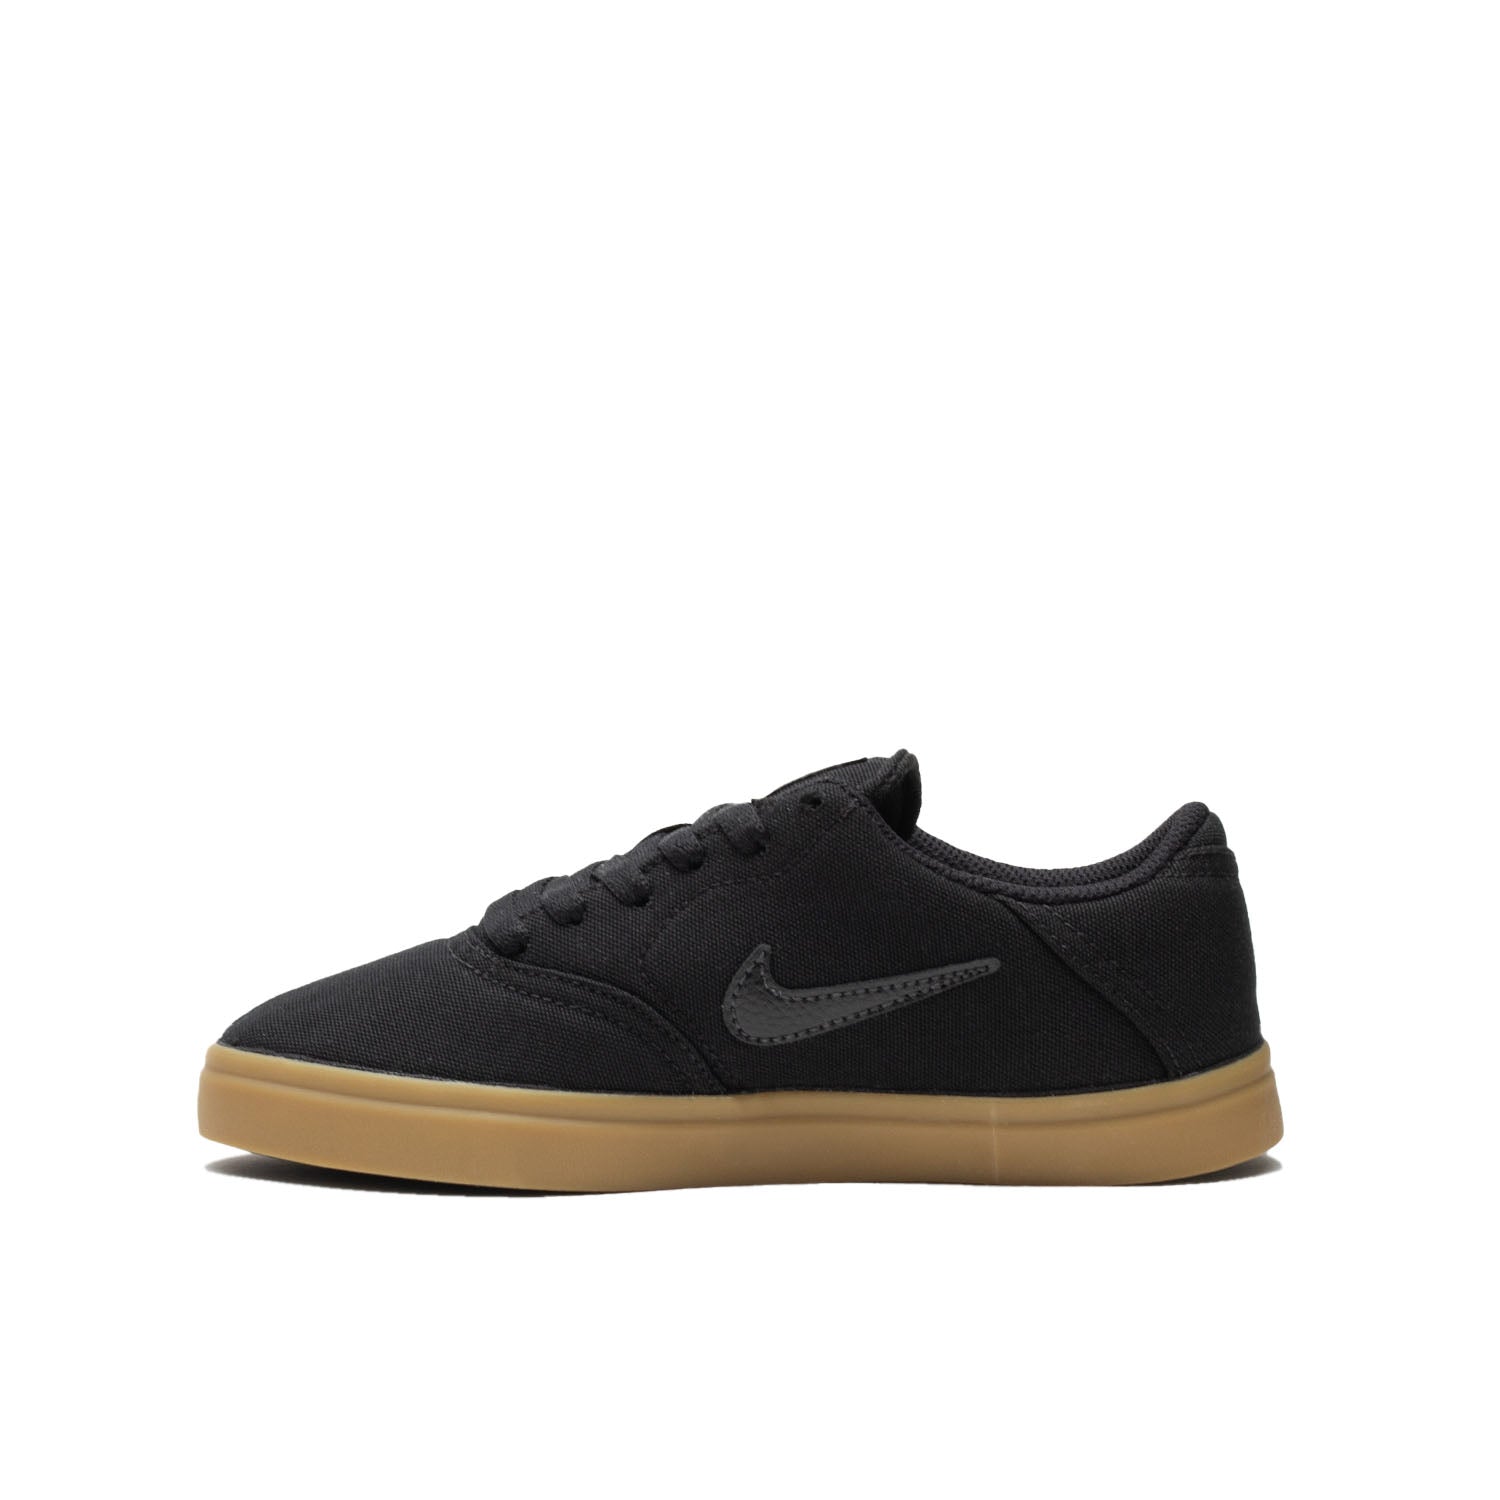 Nike SB - Check Canvas (GS) - 905373-006 black with gum sole youth skate shoe footwear